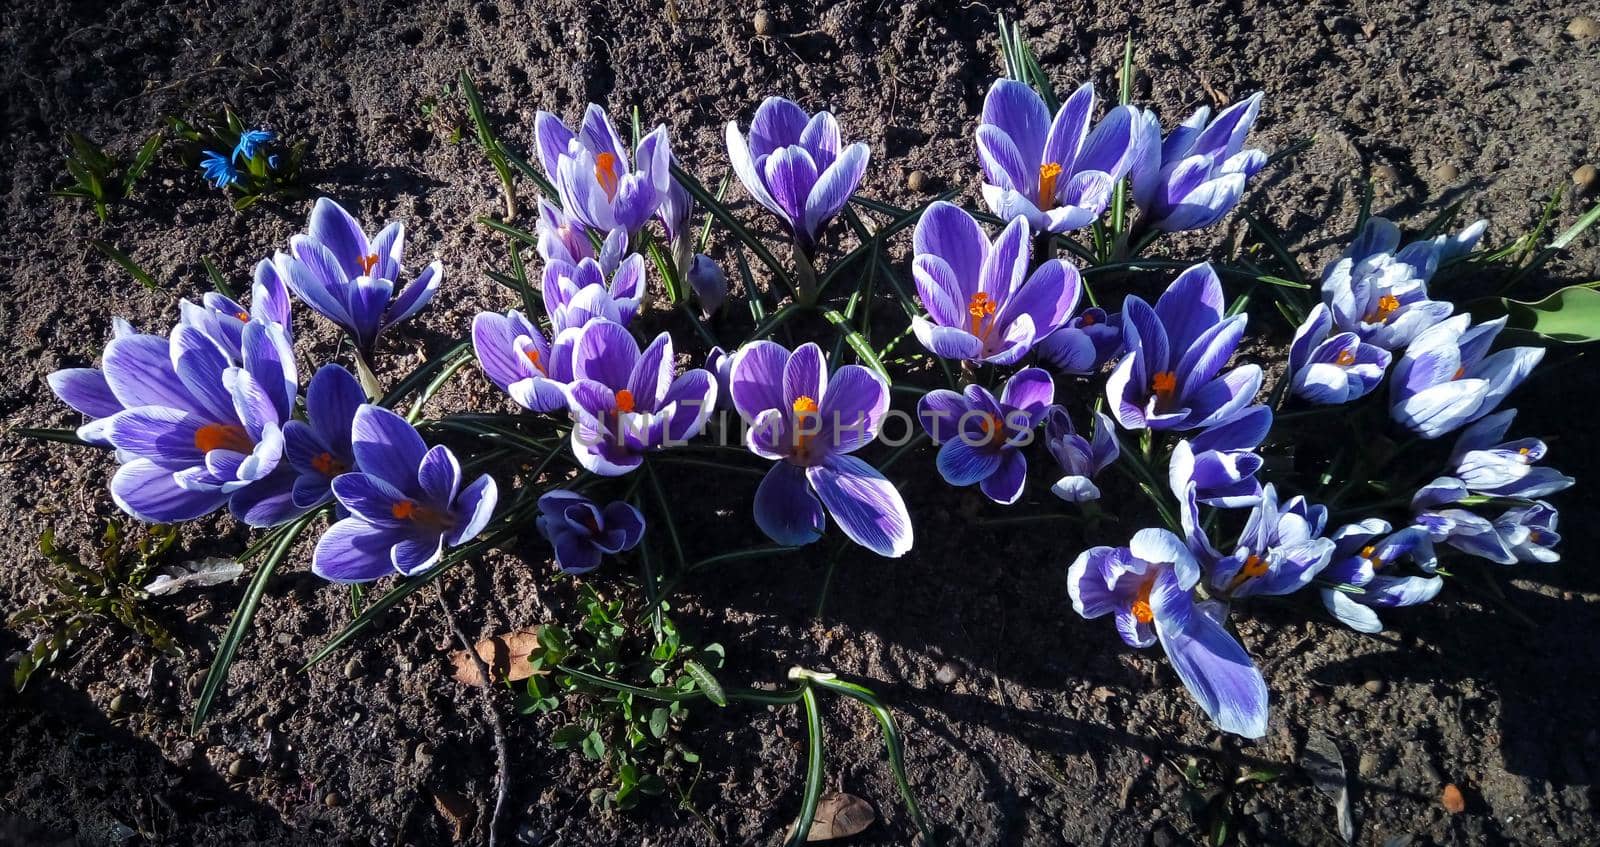 Lilac spring crocuses in the park on a flower bed. The first spring flowers.